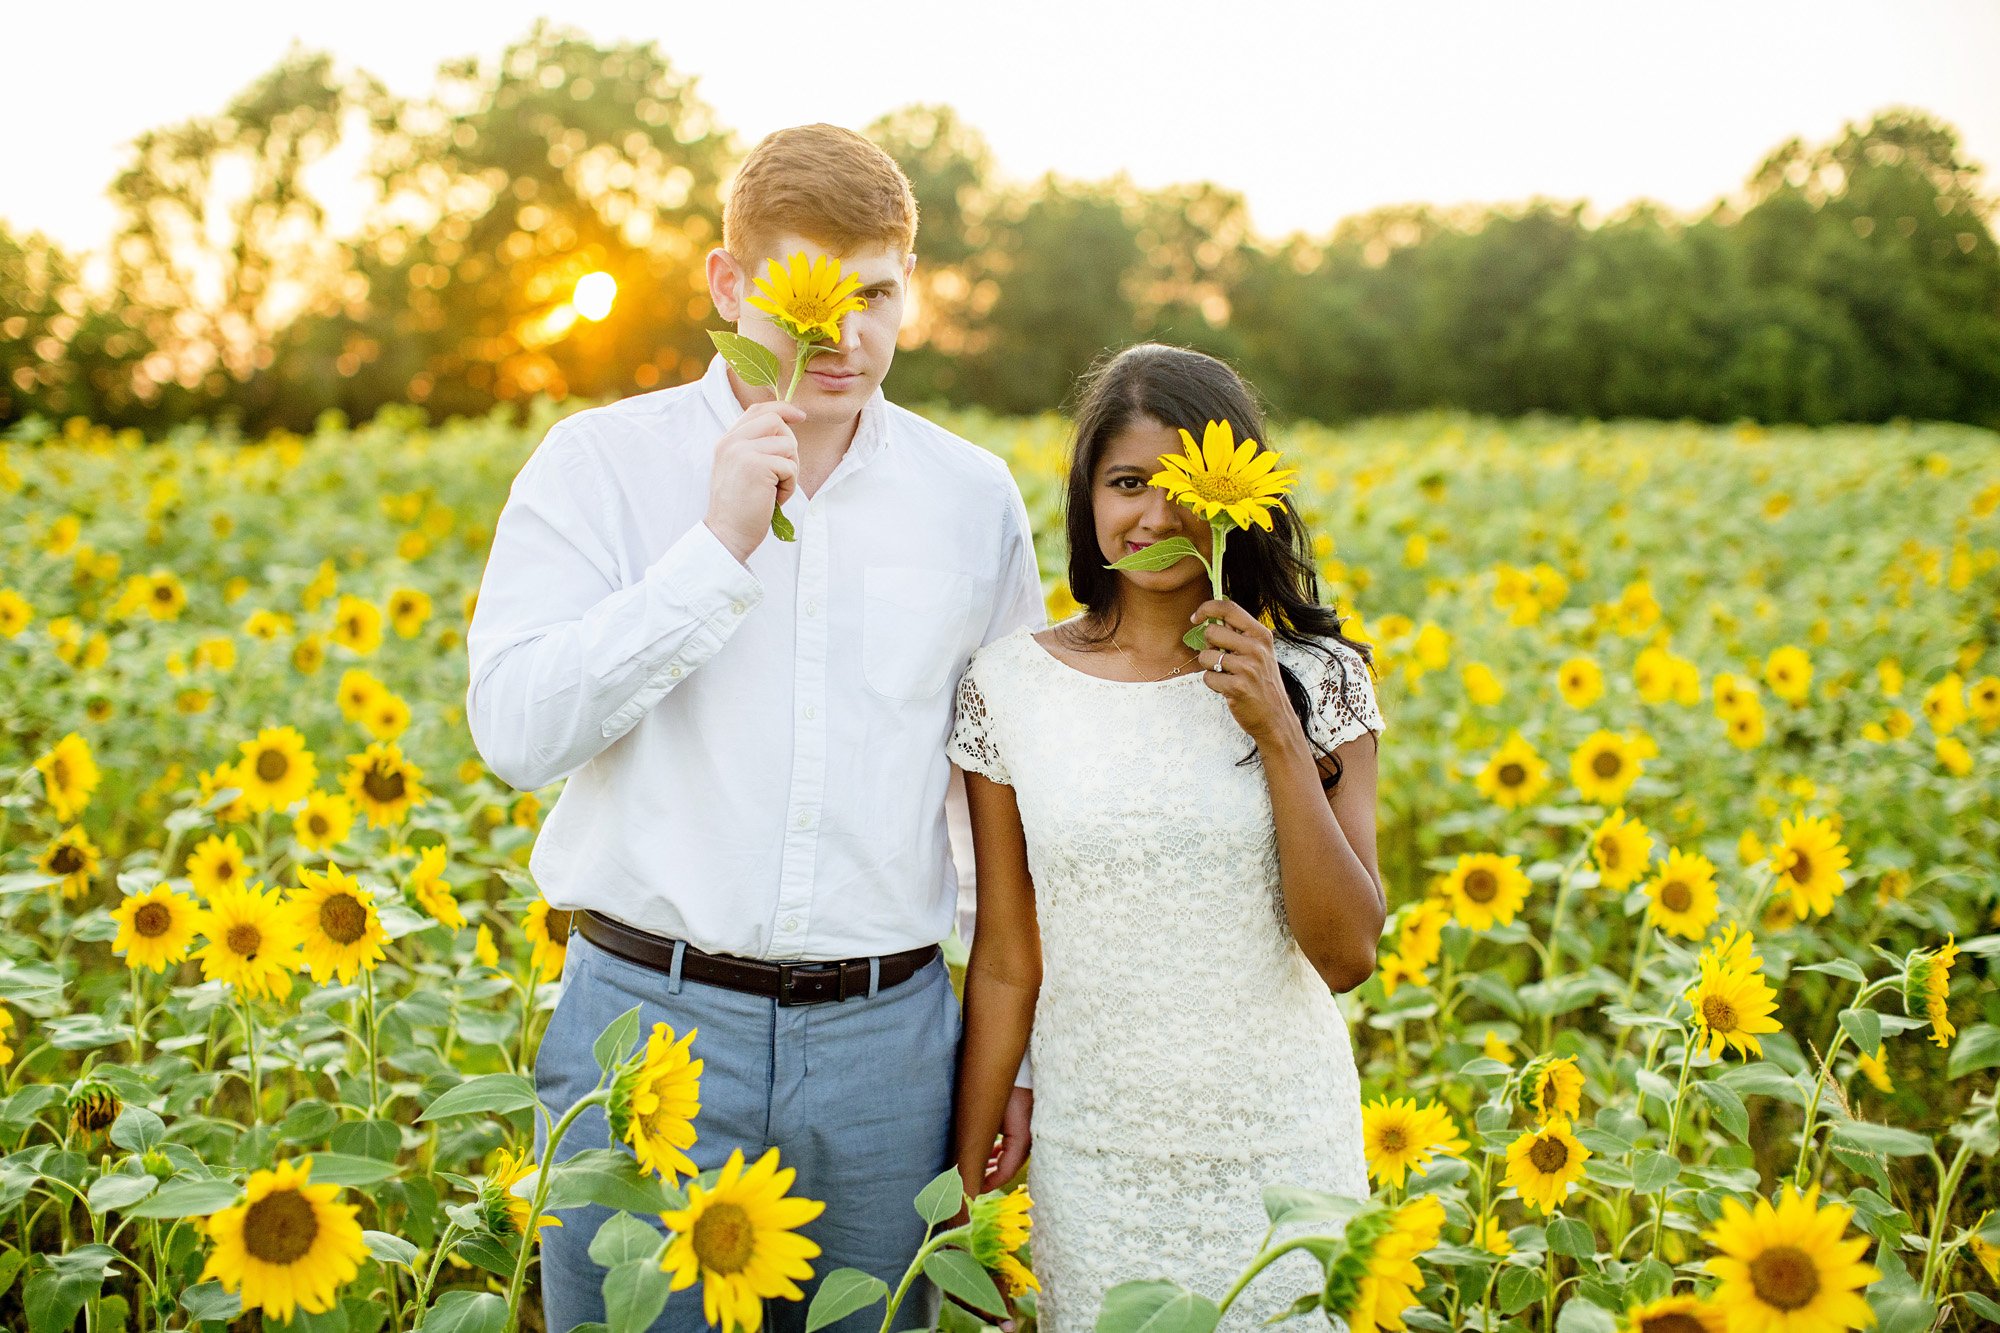 Seriously_Sabrina_Photography_Lexington_Midway_Kentucky_Engagement_Merefield_Sunflowers_Naz_and_Drew4.jpg